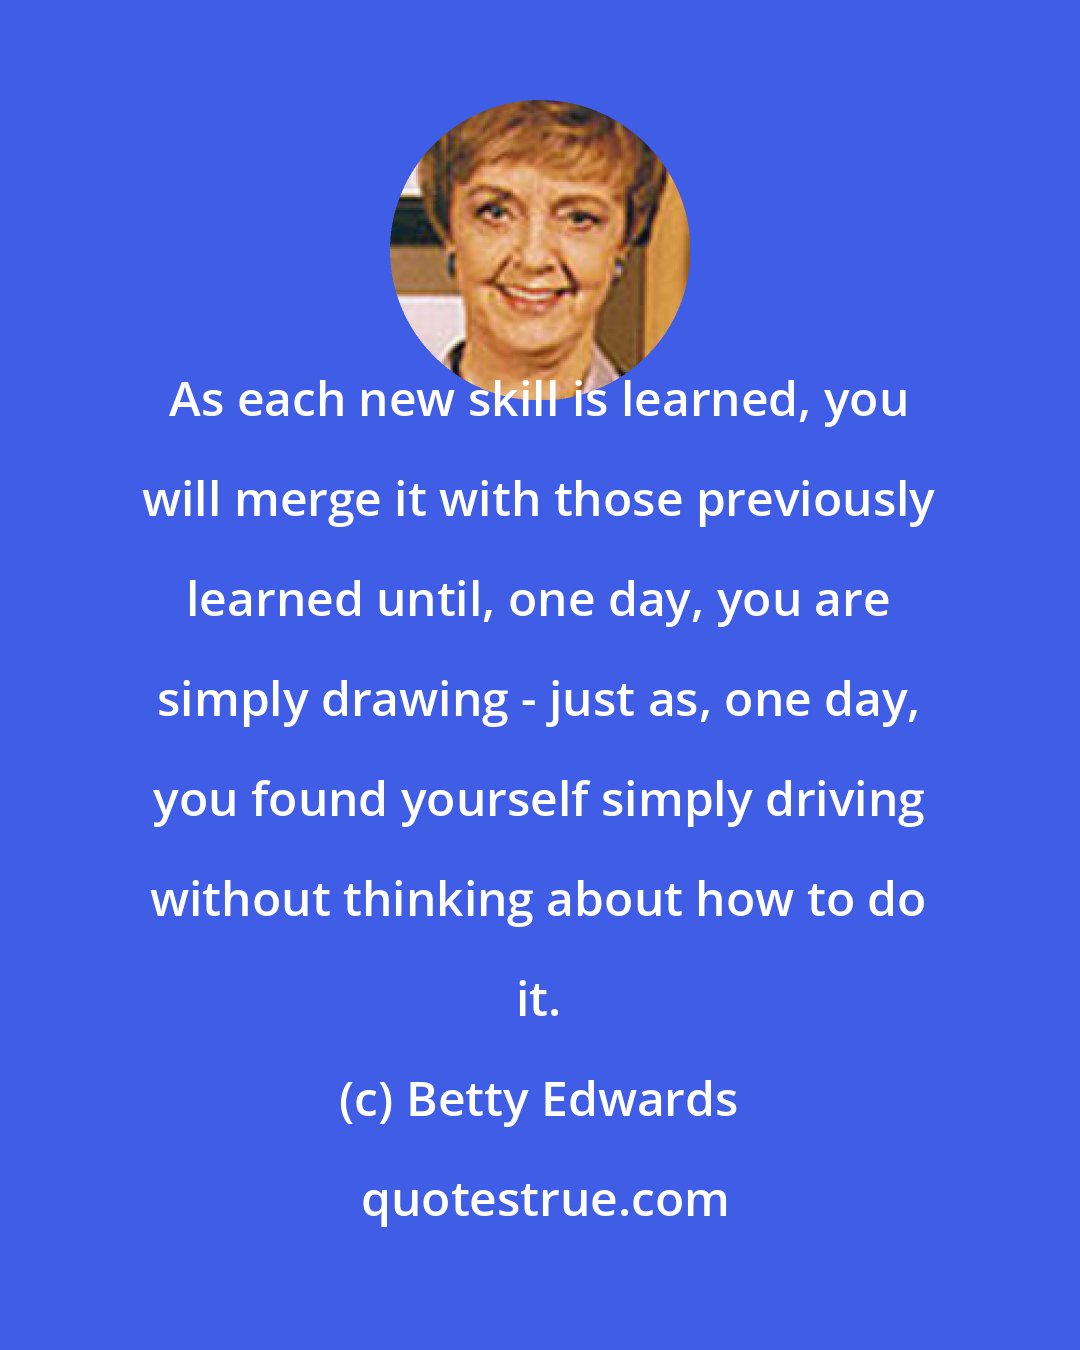 Betty Edwards: As each new skill is learned, you will merge it with those previously learned until, one day, you are simply drawing - just as, one day, you found yourself simply driving without thinking about how to do it.